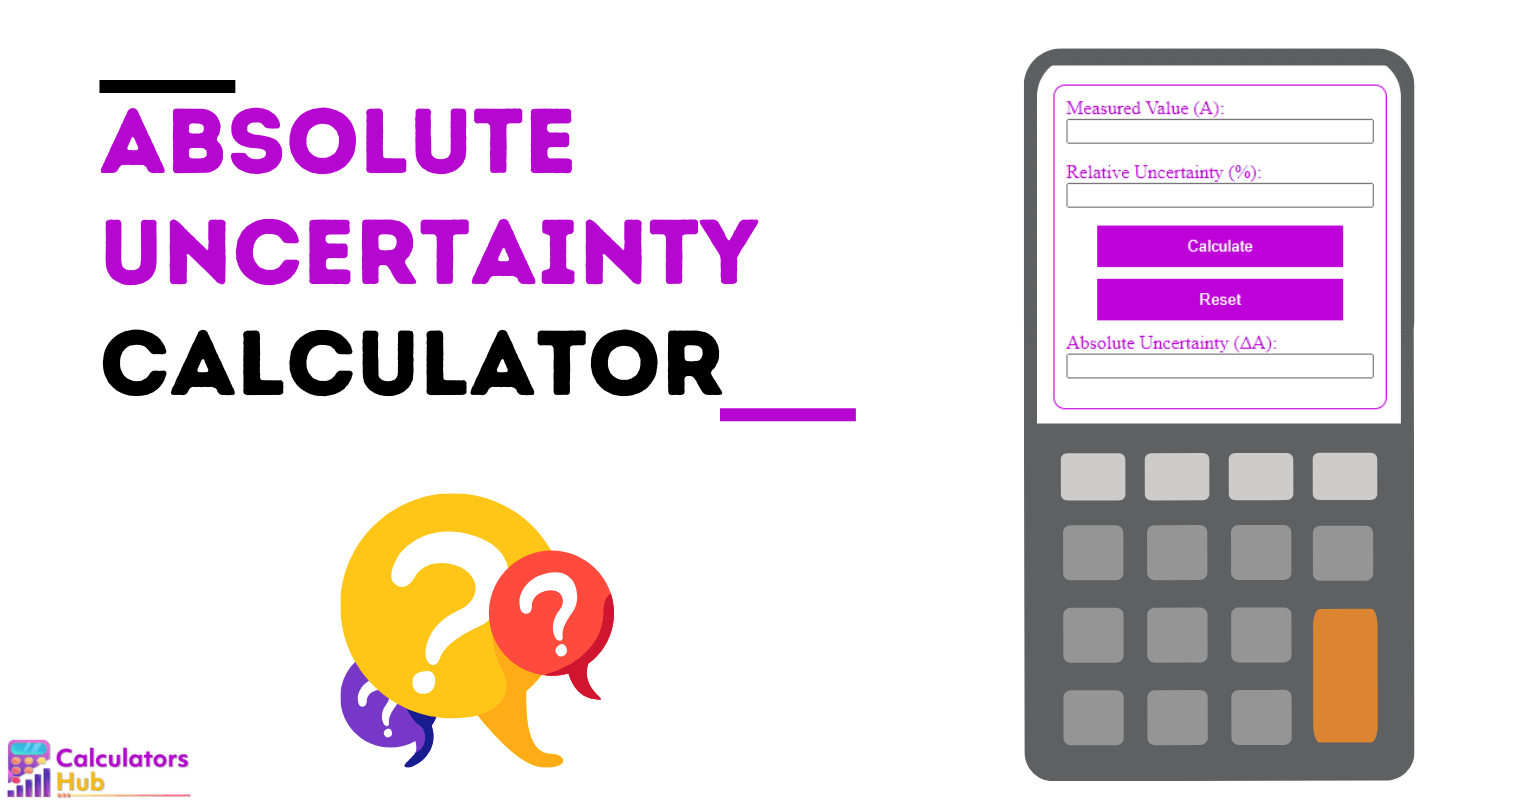 Absolute Uncertainty Calculator